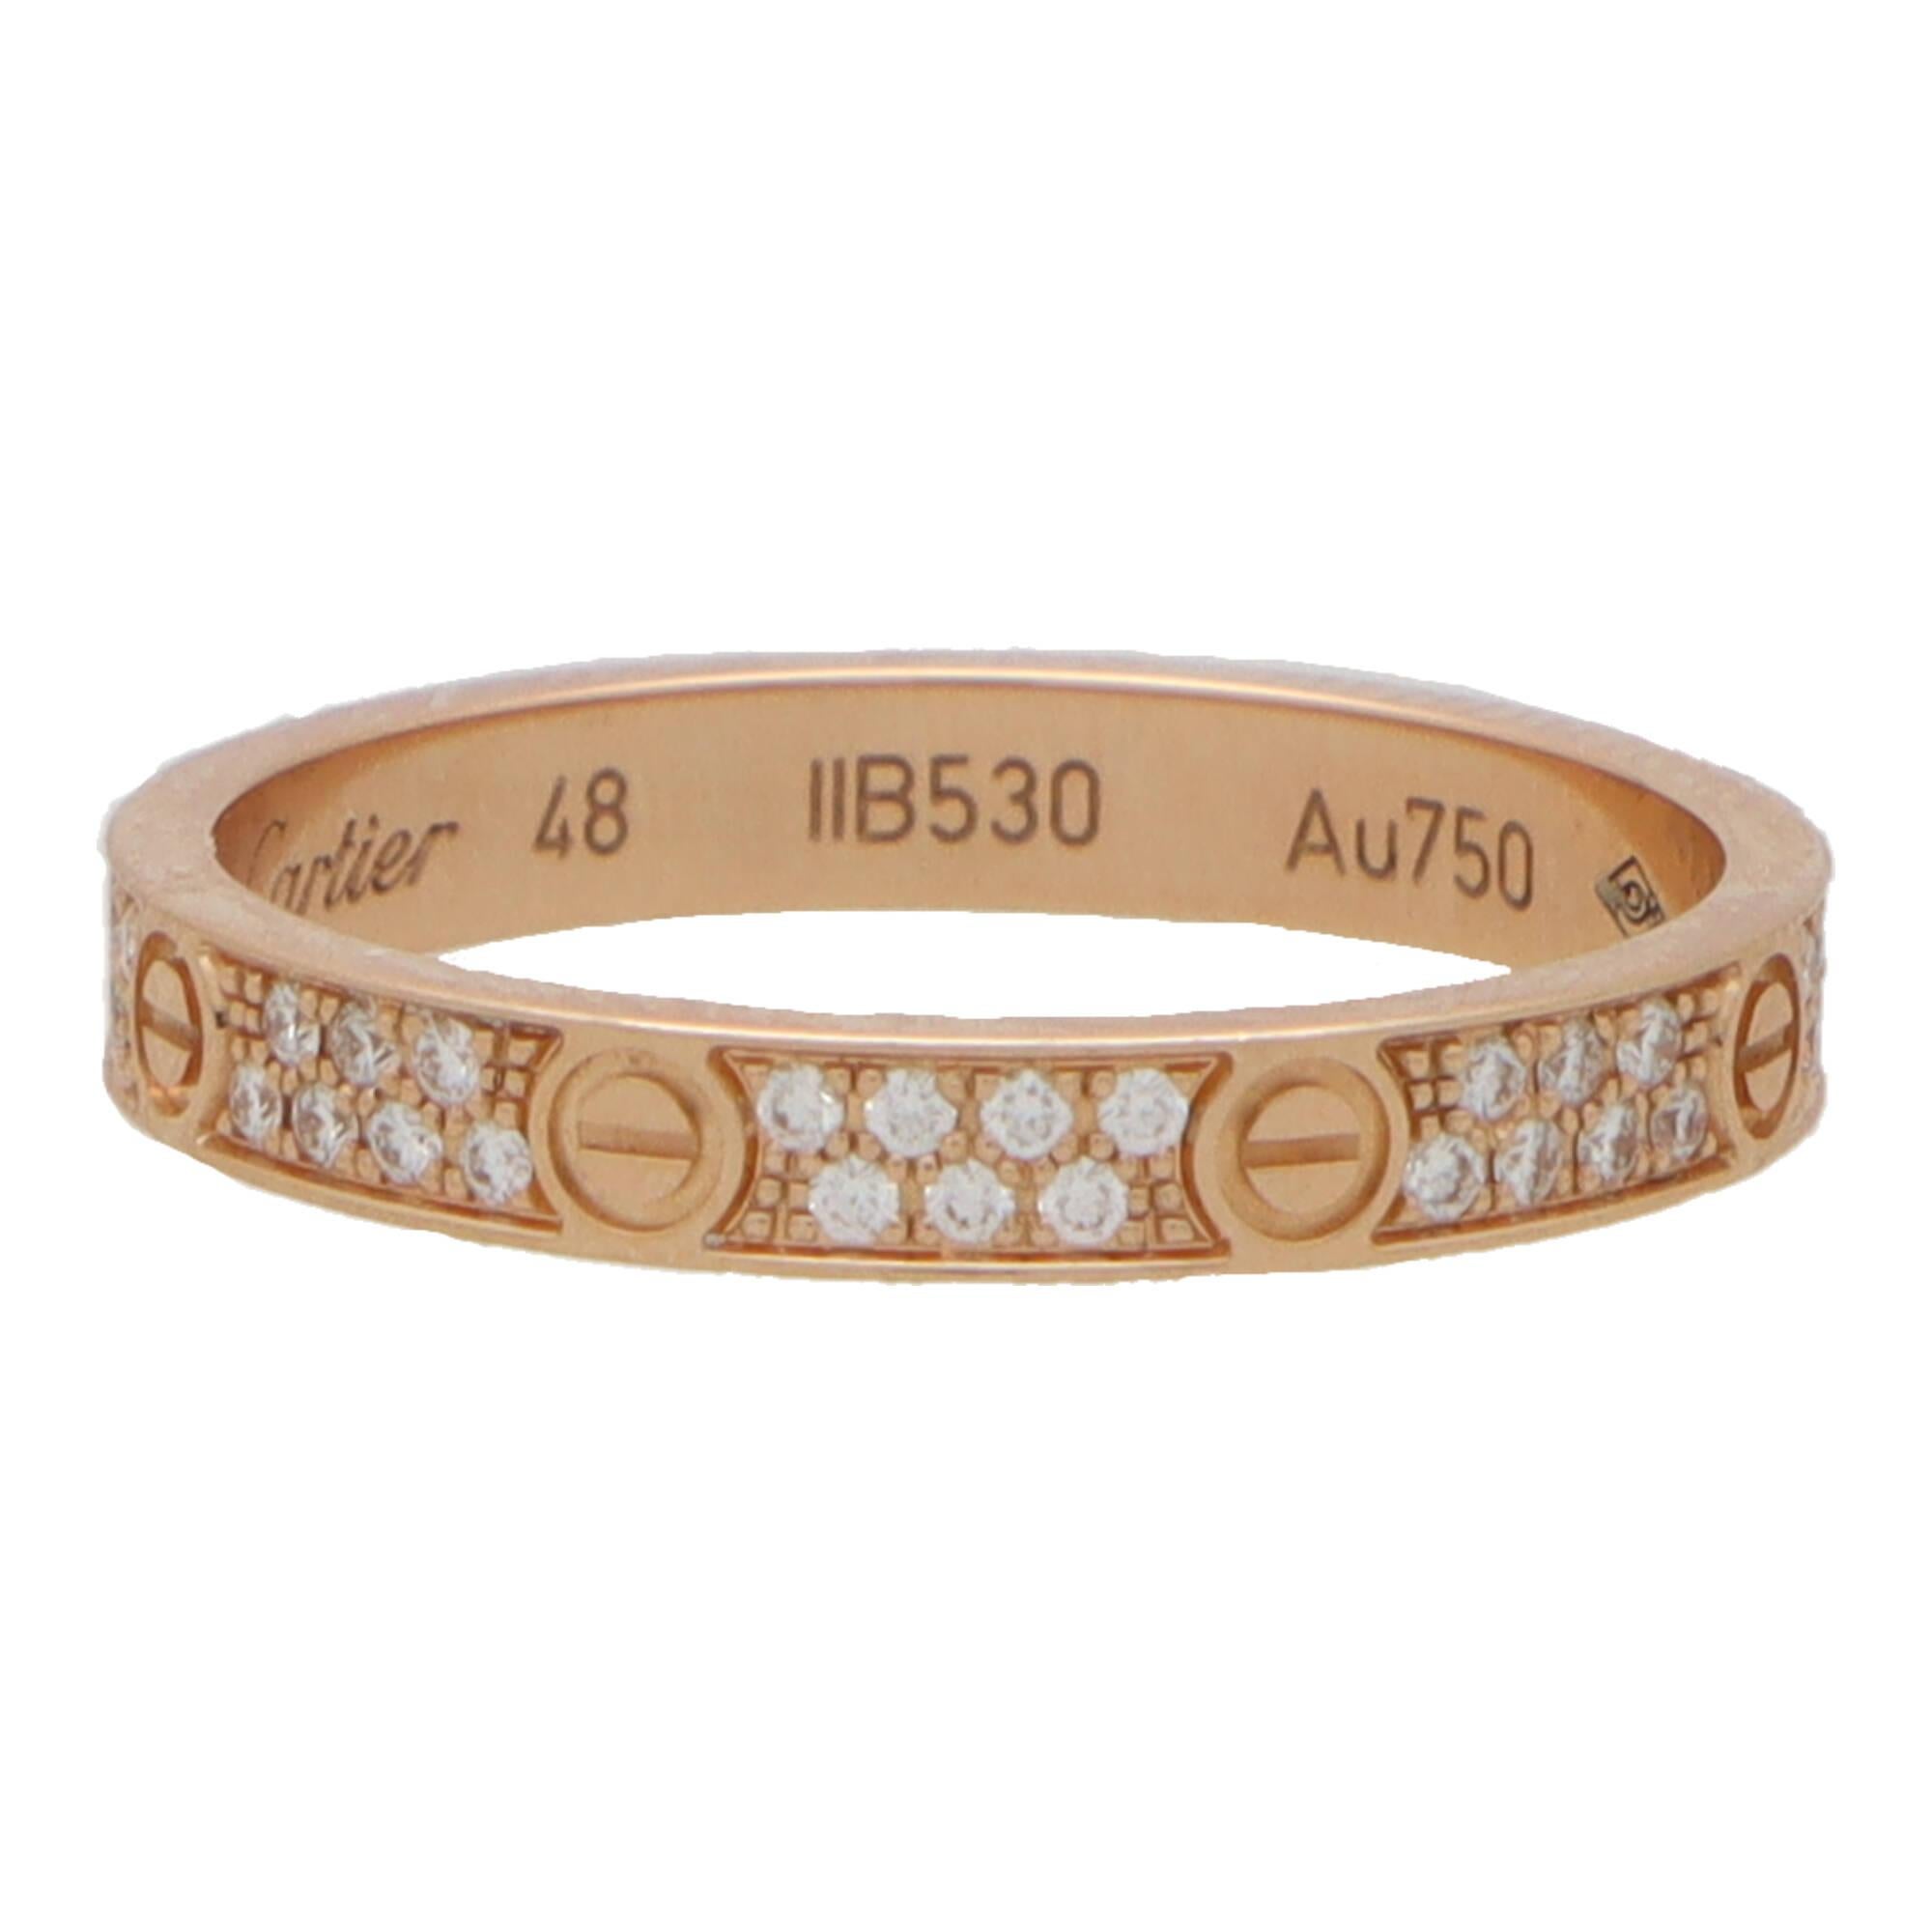  A vintage Cartier diamond mini Love ring set in 18k rose gold.

The Love collection is a firm favourite of many mainly due to the simple yet beautiful design. This particular love ring is from the Love ring collection and is the small model. It is